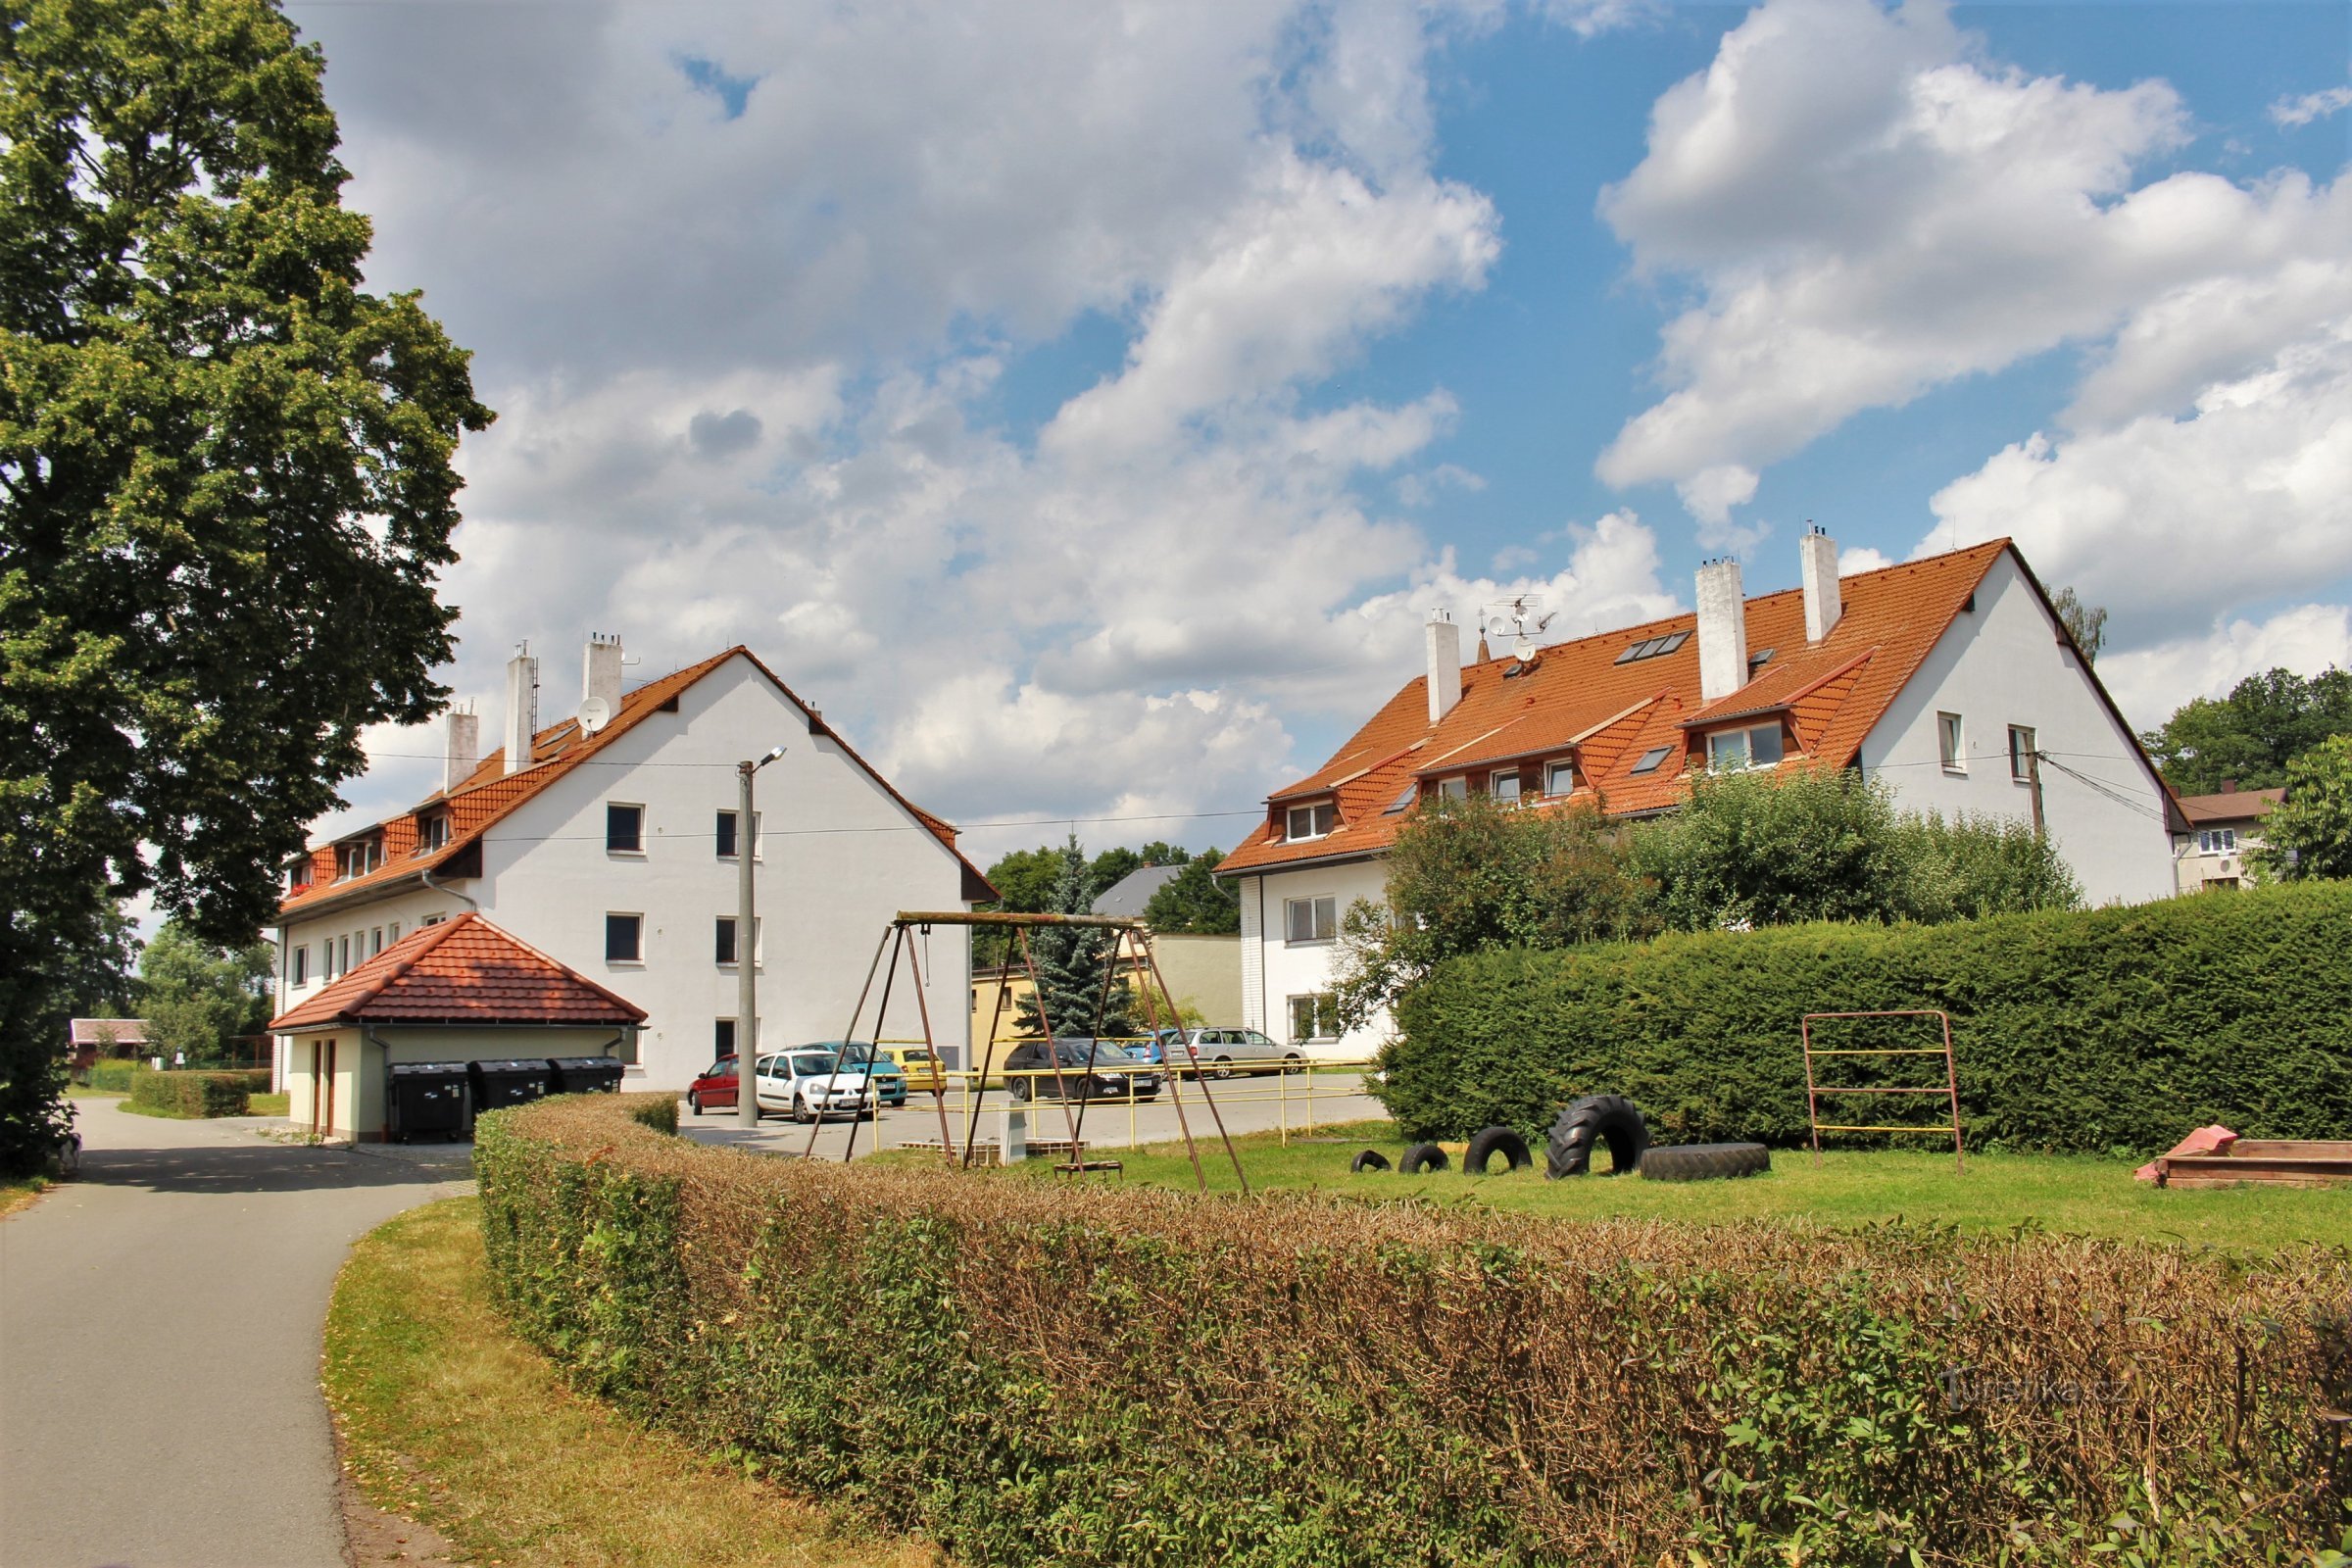 New residential construction in the village